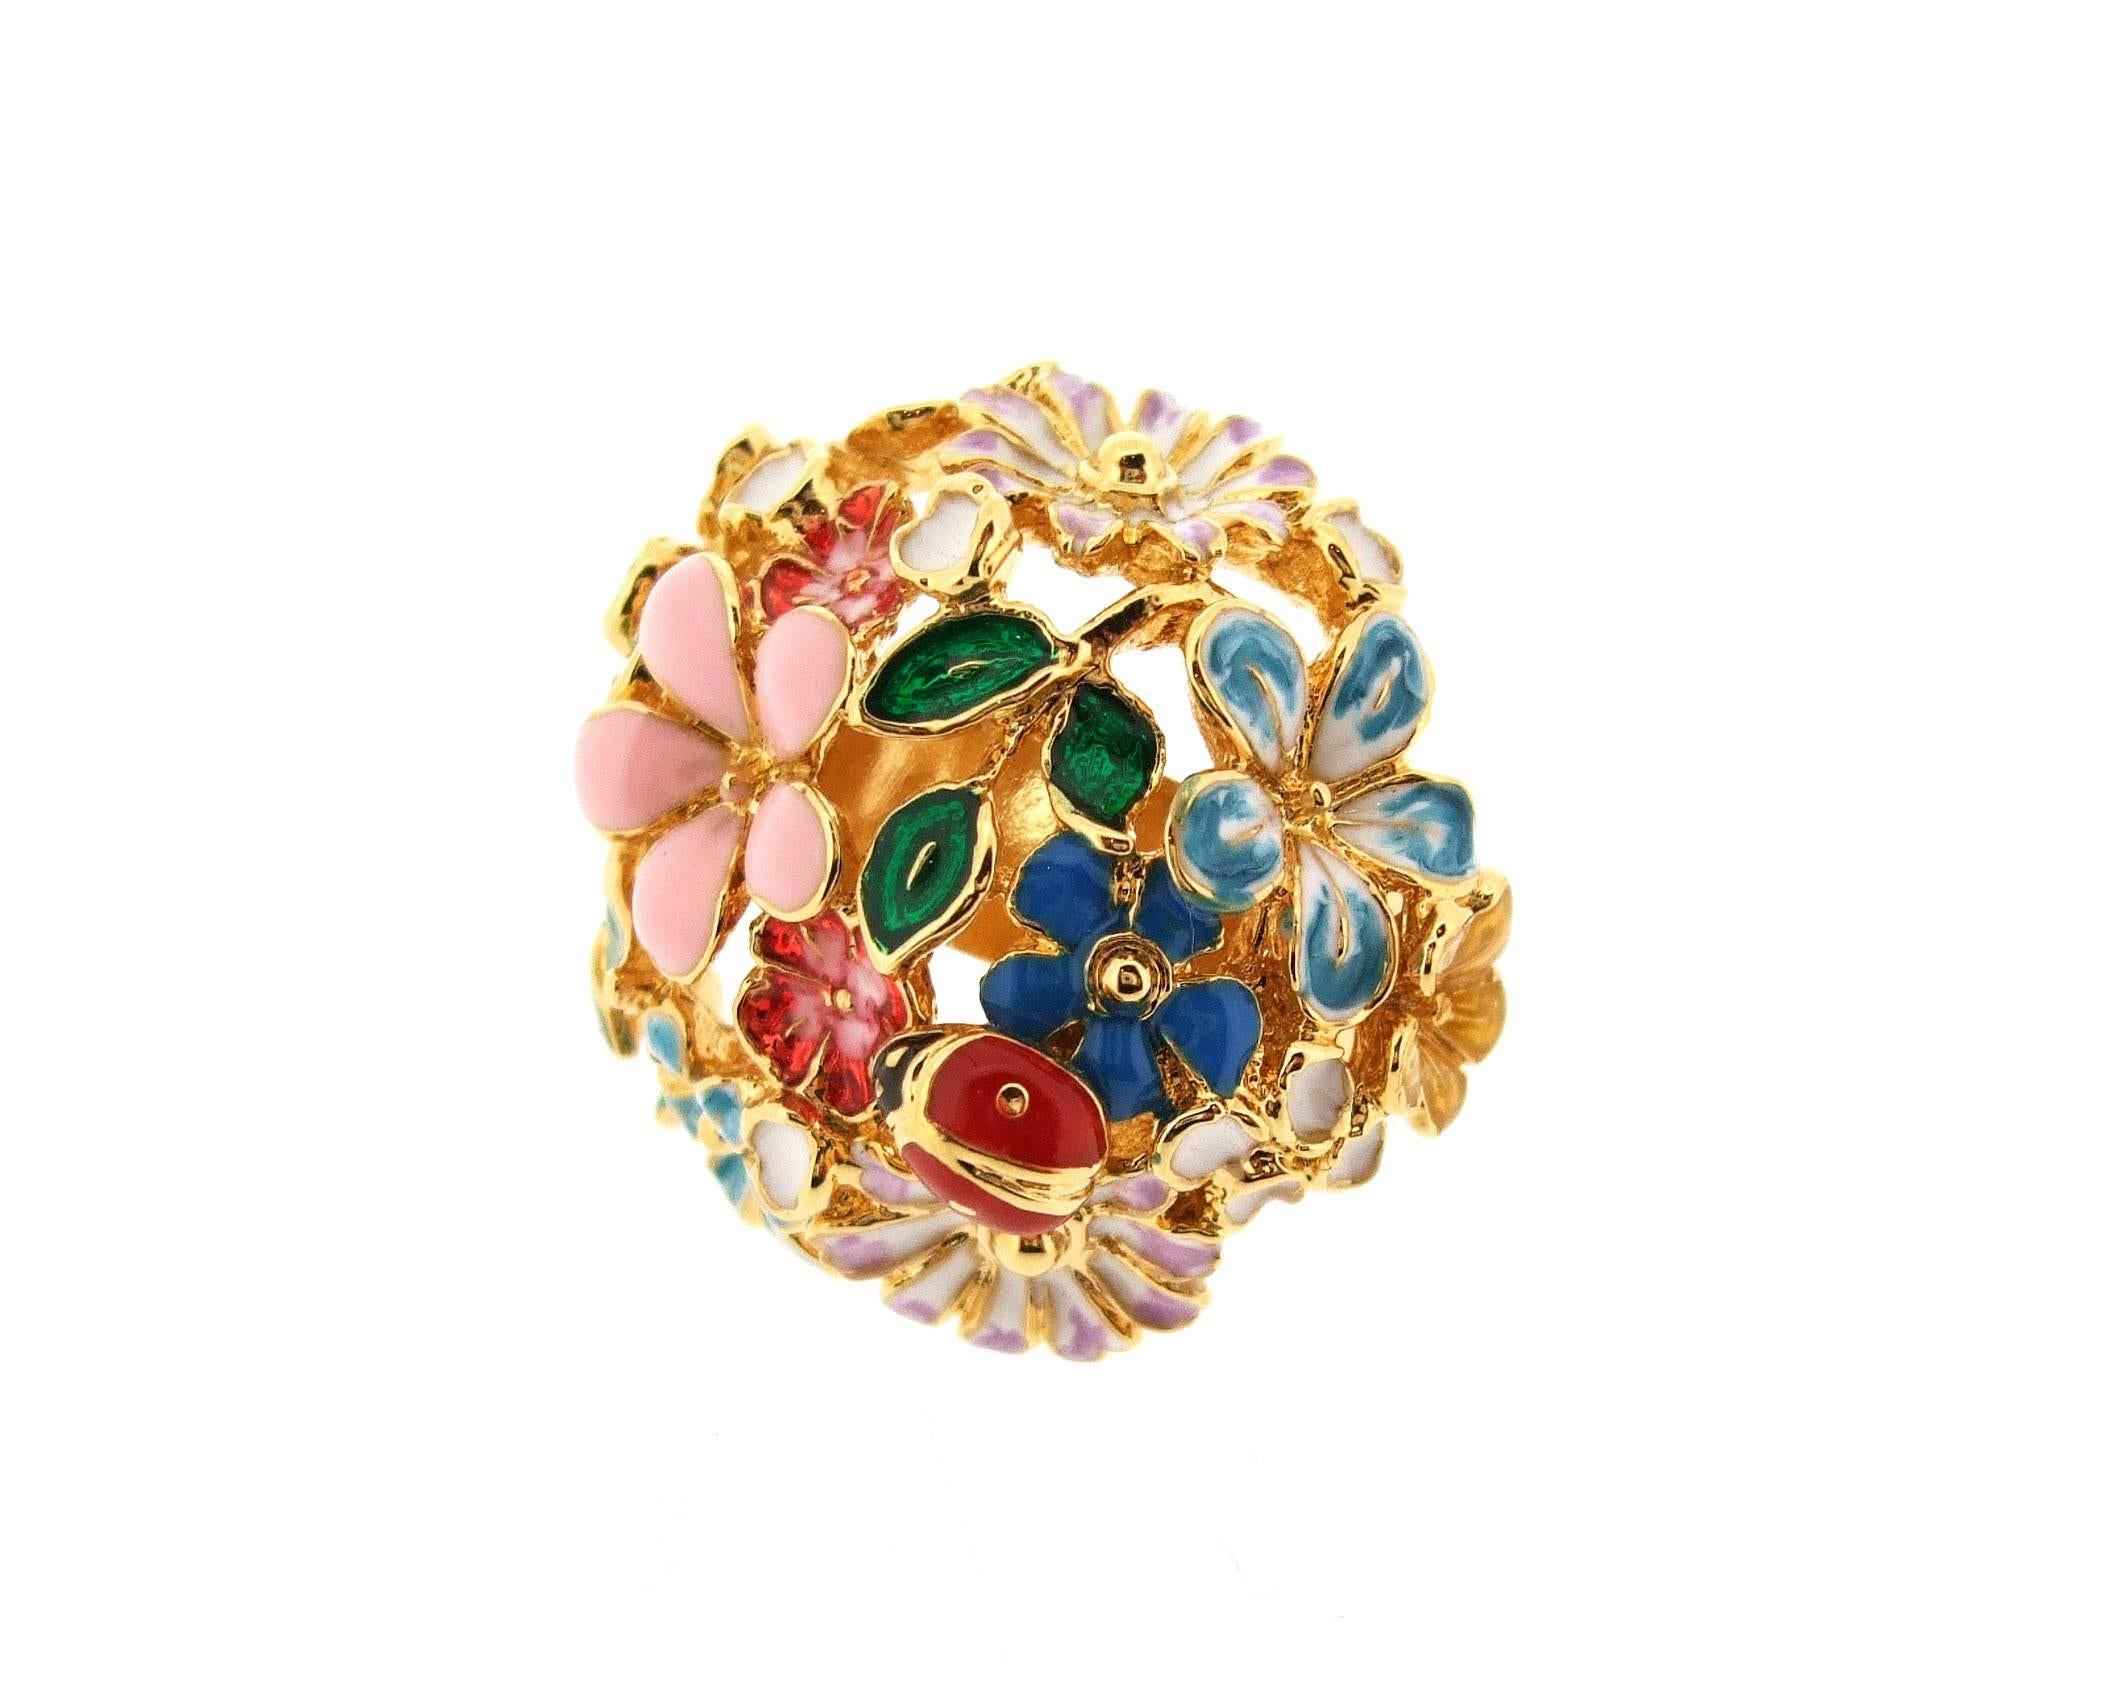 A beautiful statement ring decorated with enamel multicoloured flowers and a ladybird by Bill Skinner. Made form 18k gold plated costume metal.

It measures 2.9cm across the width by 2.6cm, it stands 2.8cm high from the base of the ring to the